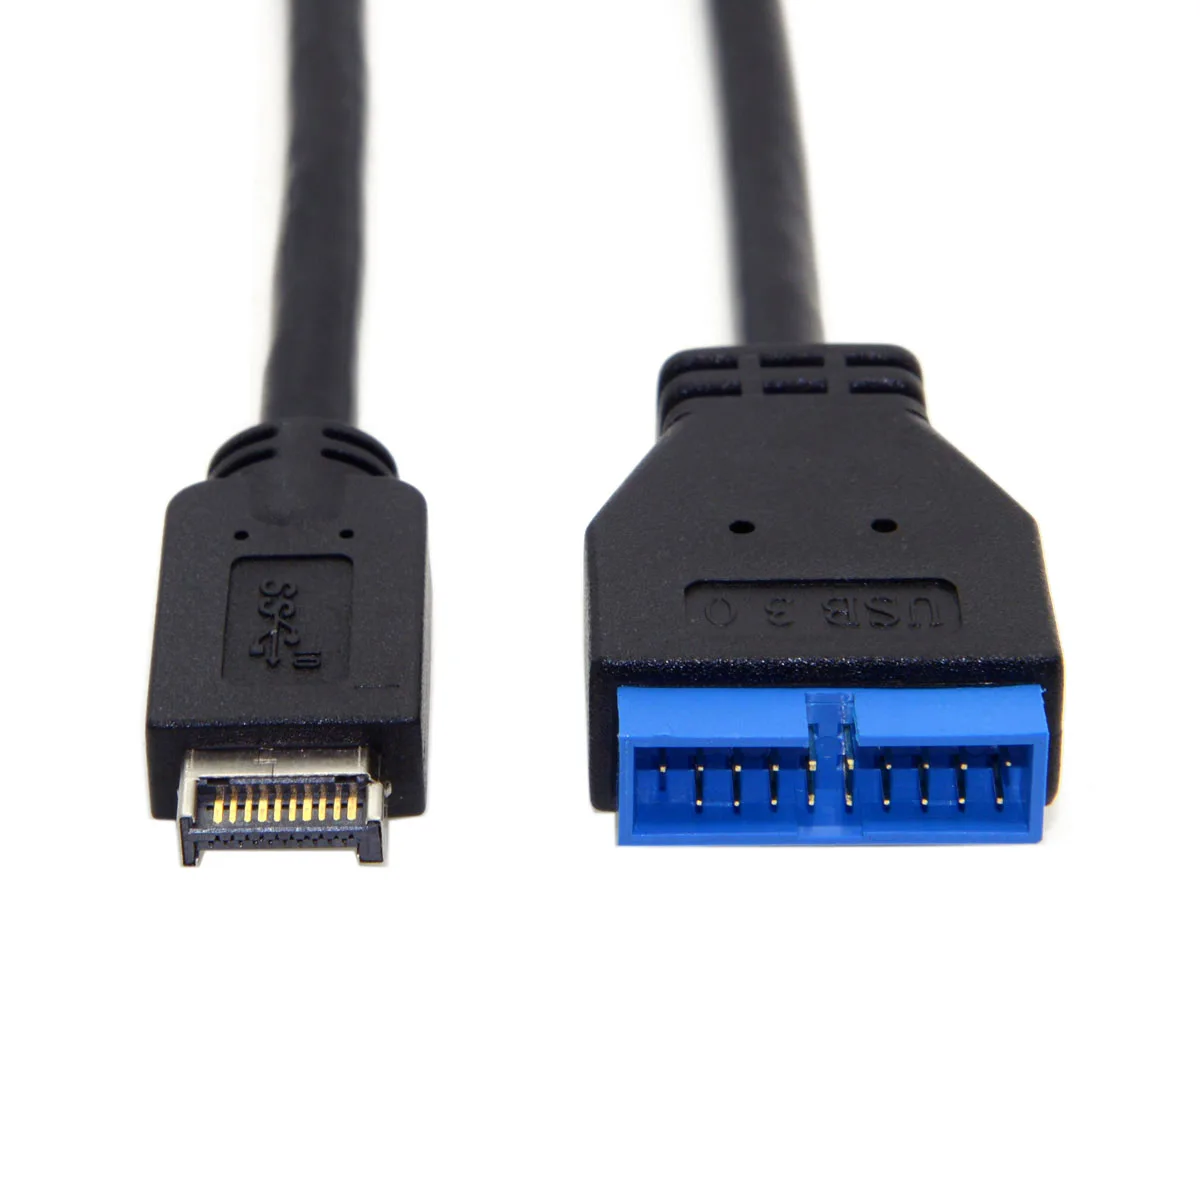 

USB 3.1 Front Panel Header to USB 3.0 20Pin Header Extension Cable 20cm for ASUS Motherboard